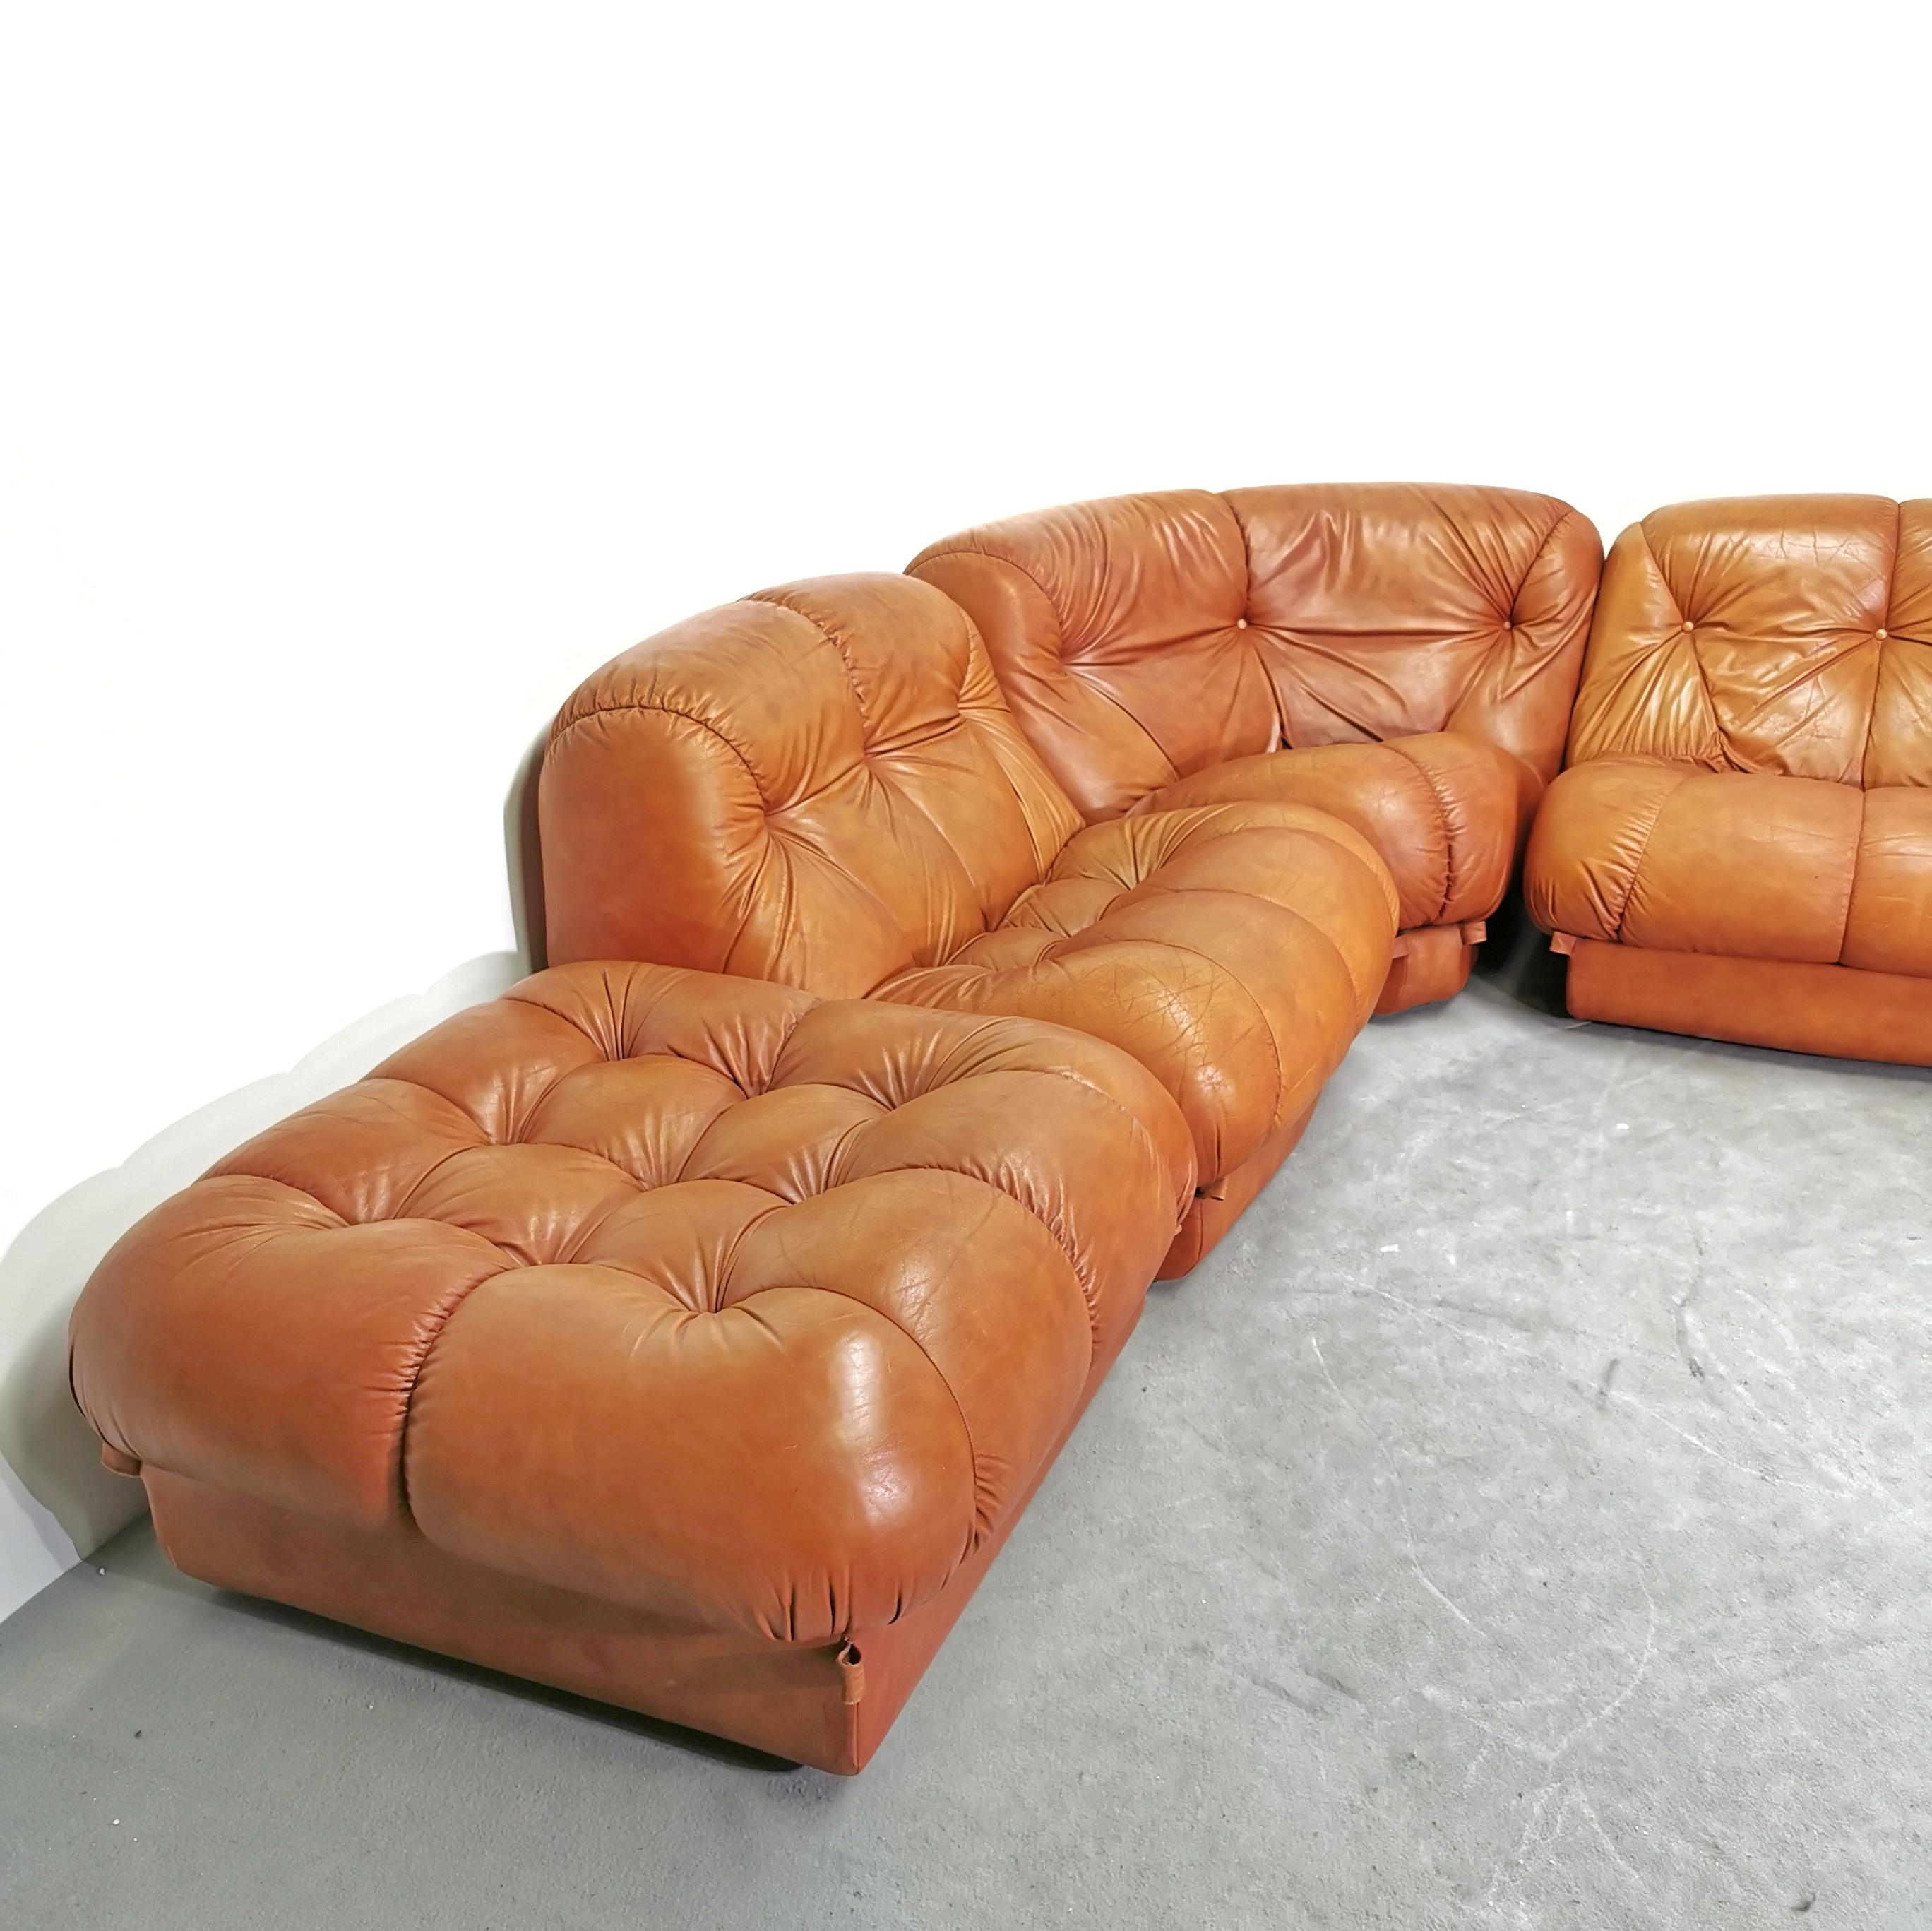 Quilted Nuvolone modular leather sofa 5 modules 70s Rino Maturi for Mimo Design  For Sale